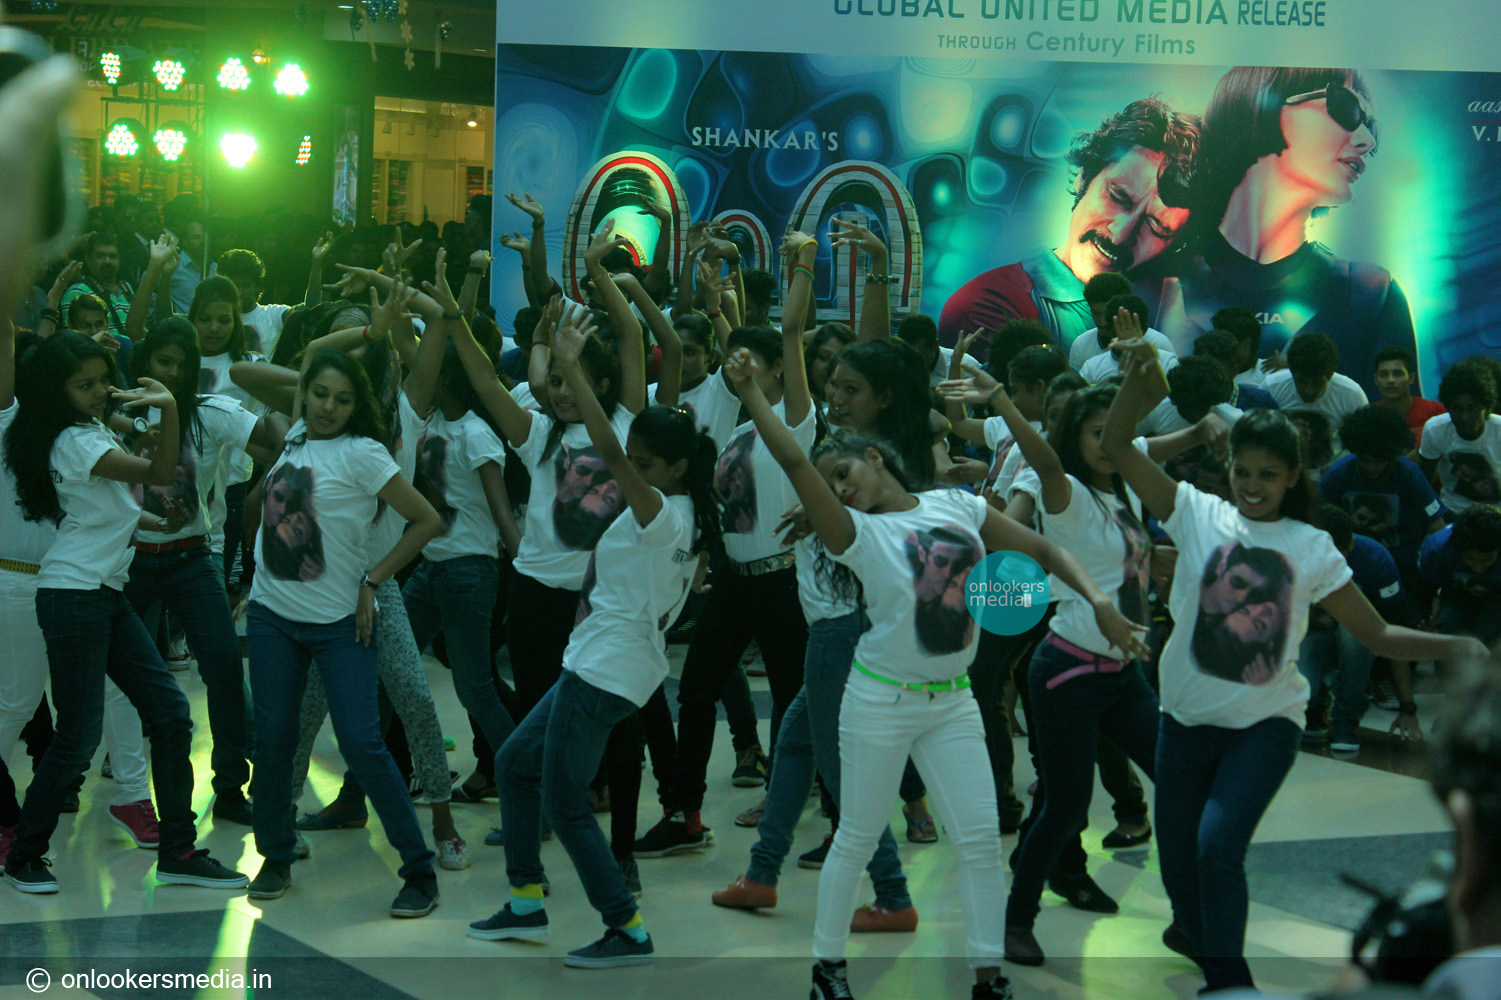 http://onlookersmedia.in/wp-content/uploads/2015/01/I-promotional-function-at-Lulu-mall-Kerala-Vikram-Amy-Jackson-Onlookers-Media-35.jpg